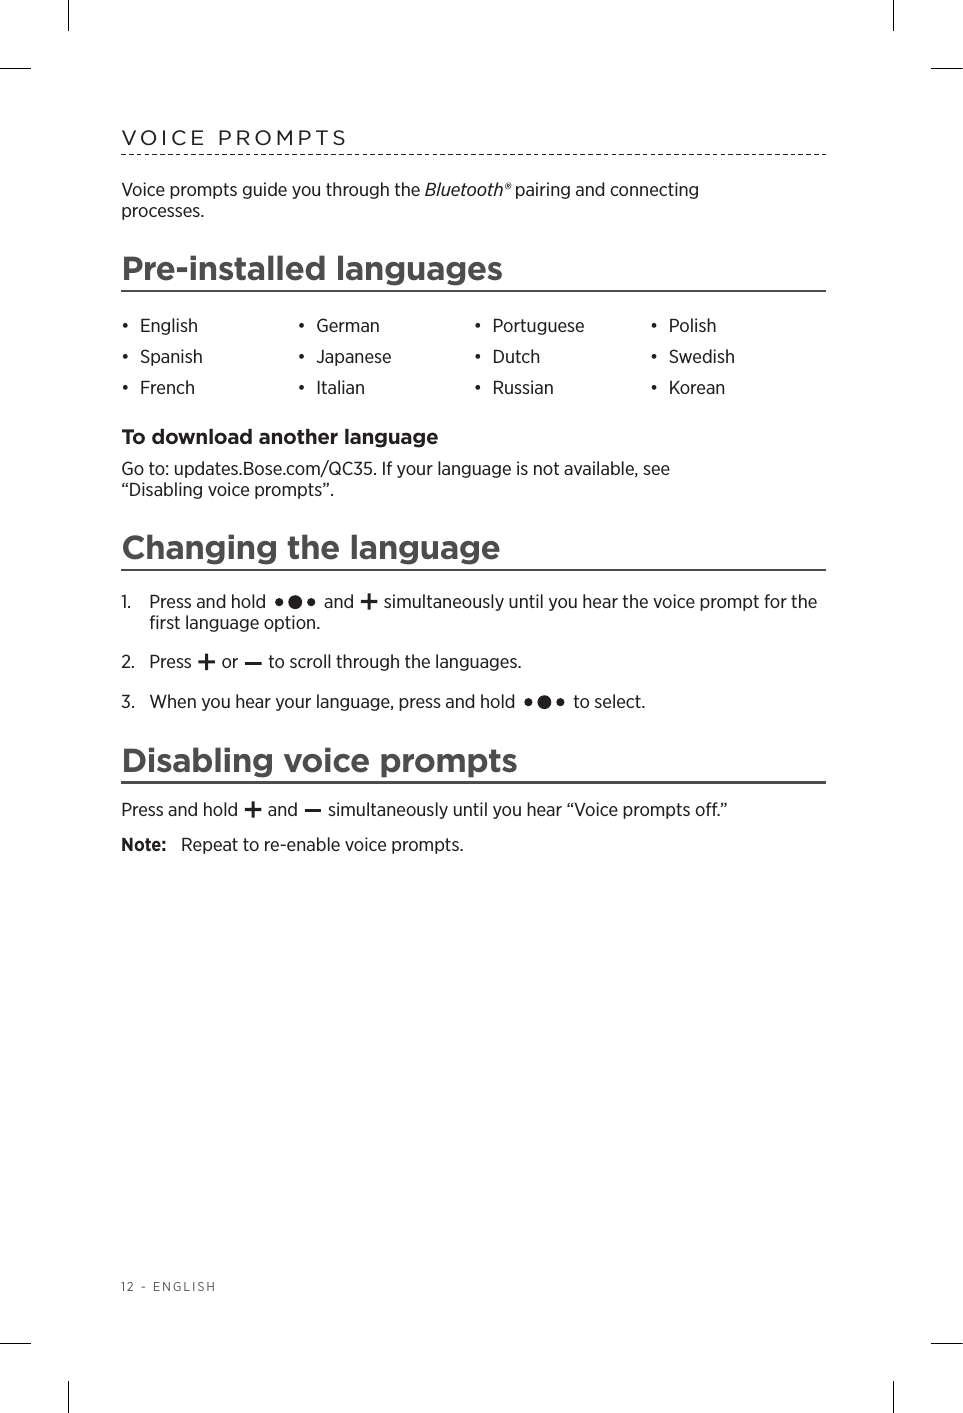 12 - ENGLISHVOICE PROMPTSVoice prompts guide you through the Bluetooth® pairing and connecting  processes. Pre-installed languages•  English •  German •  Portuguese •  Polish•  Spanish •  Japanese •  Dutch •  Swedish•  French •  Italian •  Russian •  KoreanTo download another languageGo to: updates.Bose.com/QC35. If your language is not available, see  “Disabling voice prompts”.Changing the language1.  Press and hold   and   simultaneously until you hear the voice prompt for the ﬁrst language option.2.  Press   or   to scroll through the languages.3.   When you hear your language, press and hold   to select.Disabling voice promptsPress and hold   and   simultaneously until you hear “Voice prompts o.” Note:  Repeat to re-enable voice prompts.